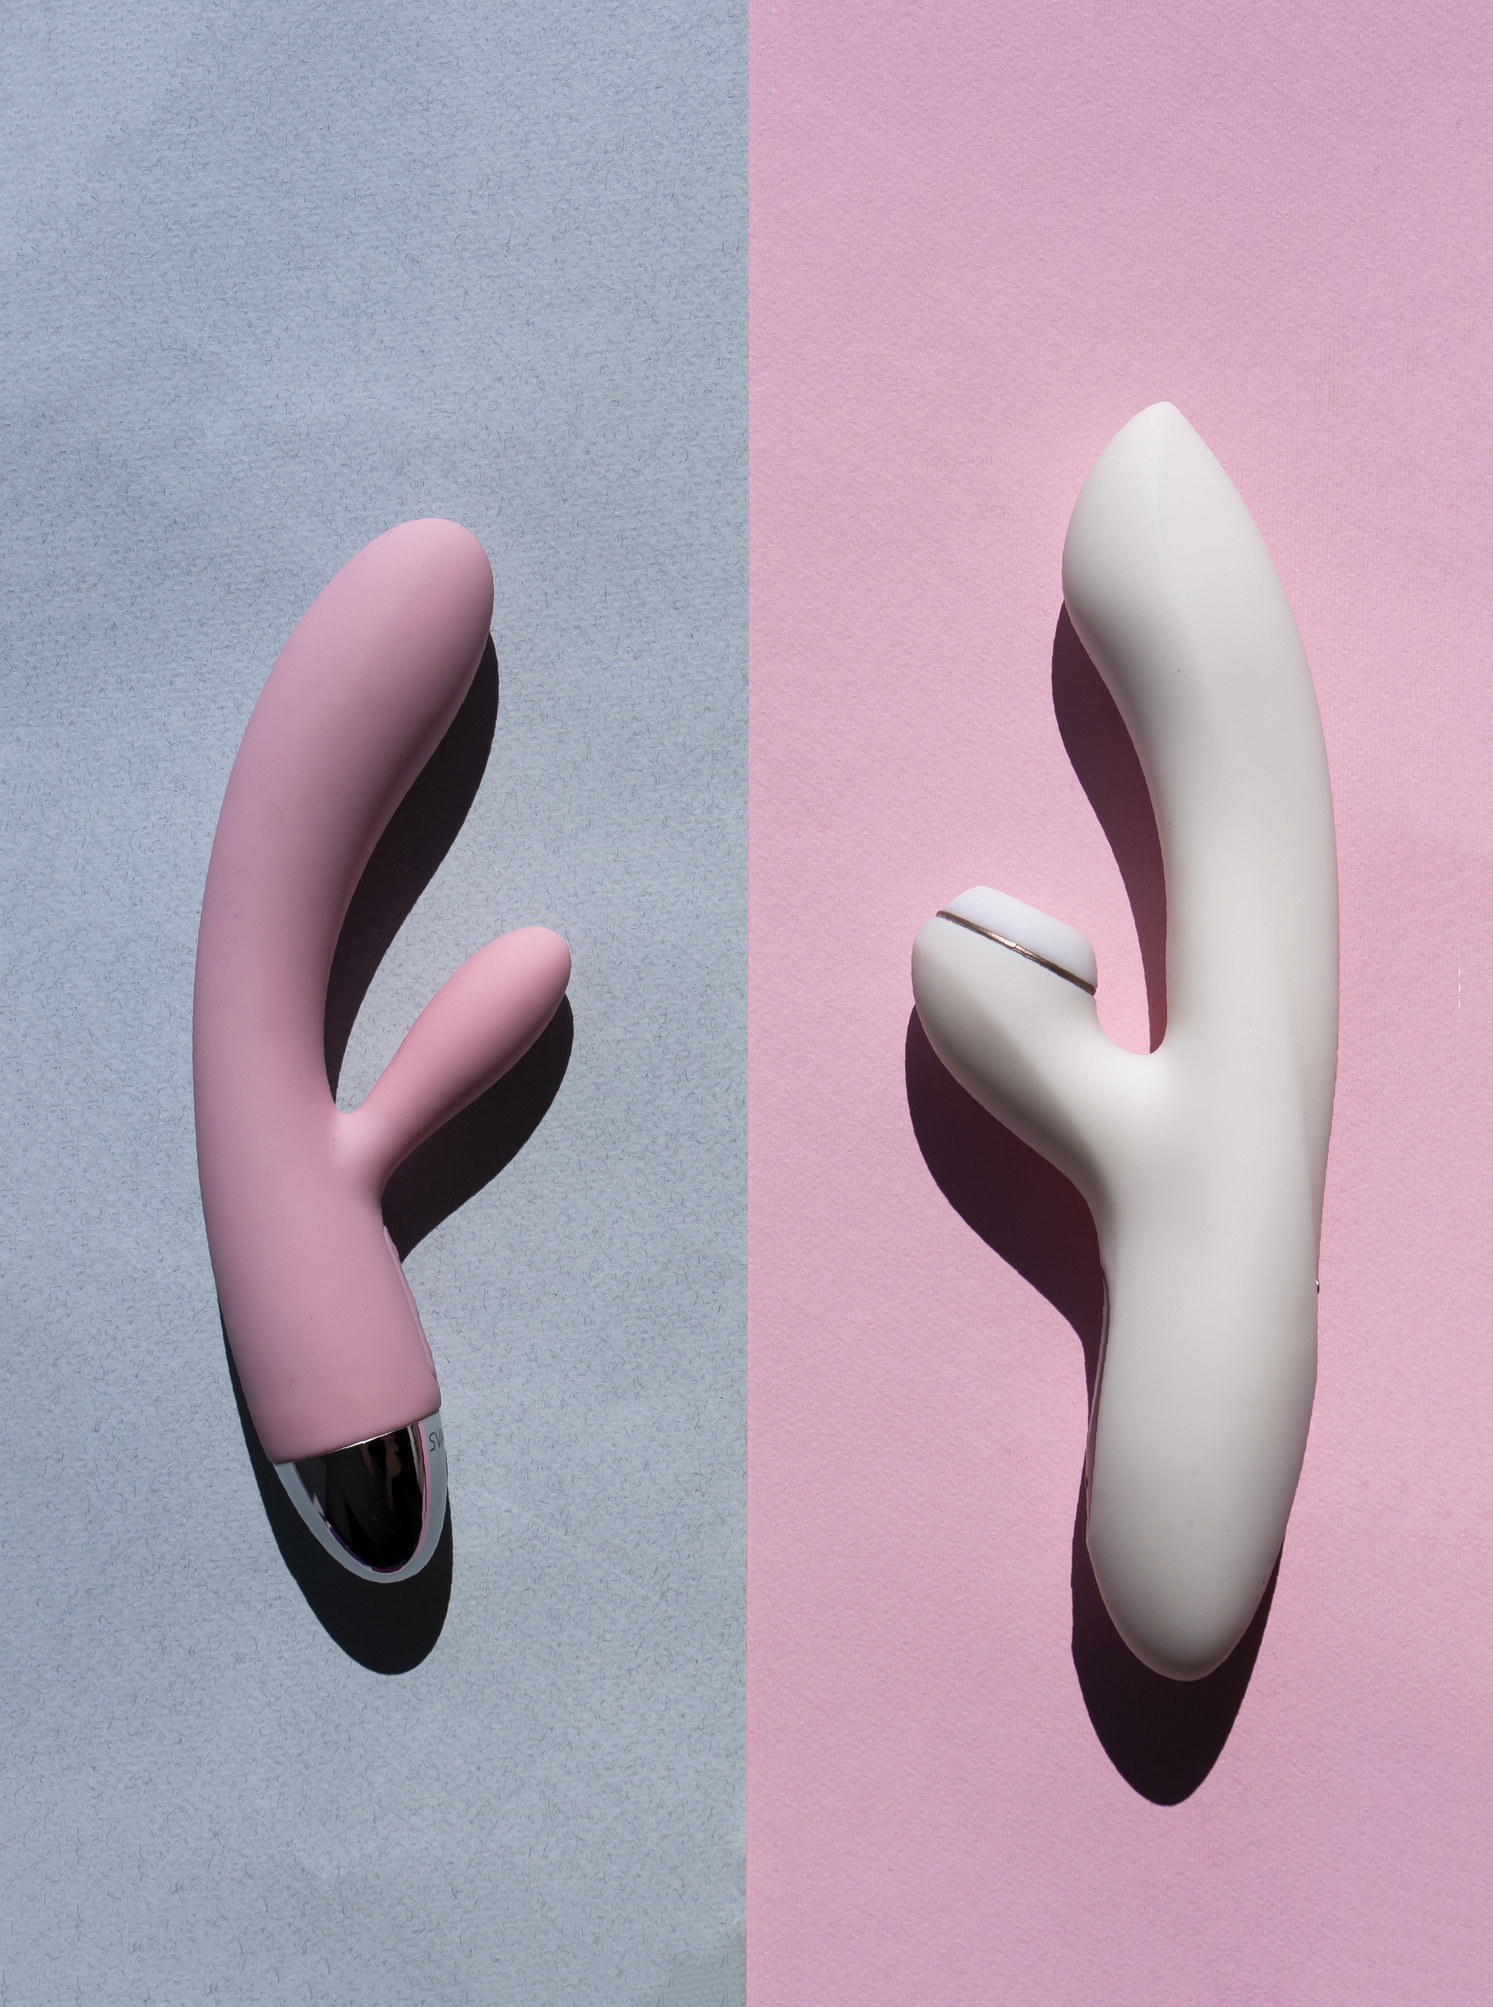 Stock photo of two sex toys on pink and gray backrgound